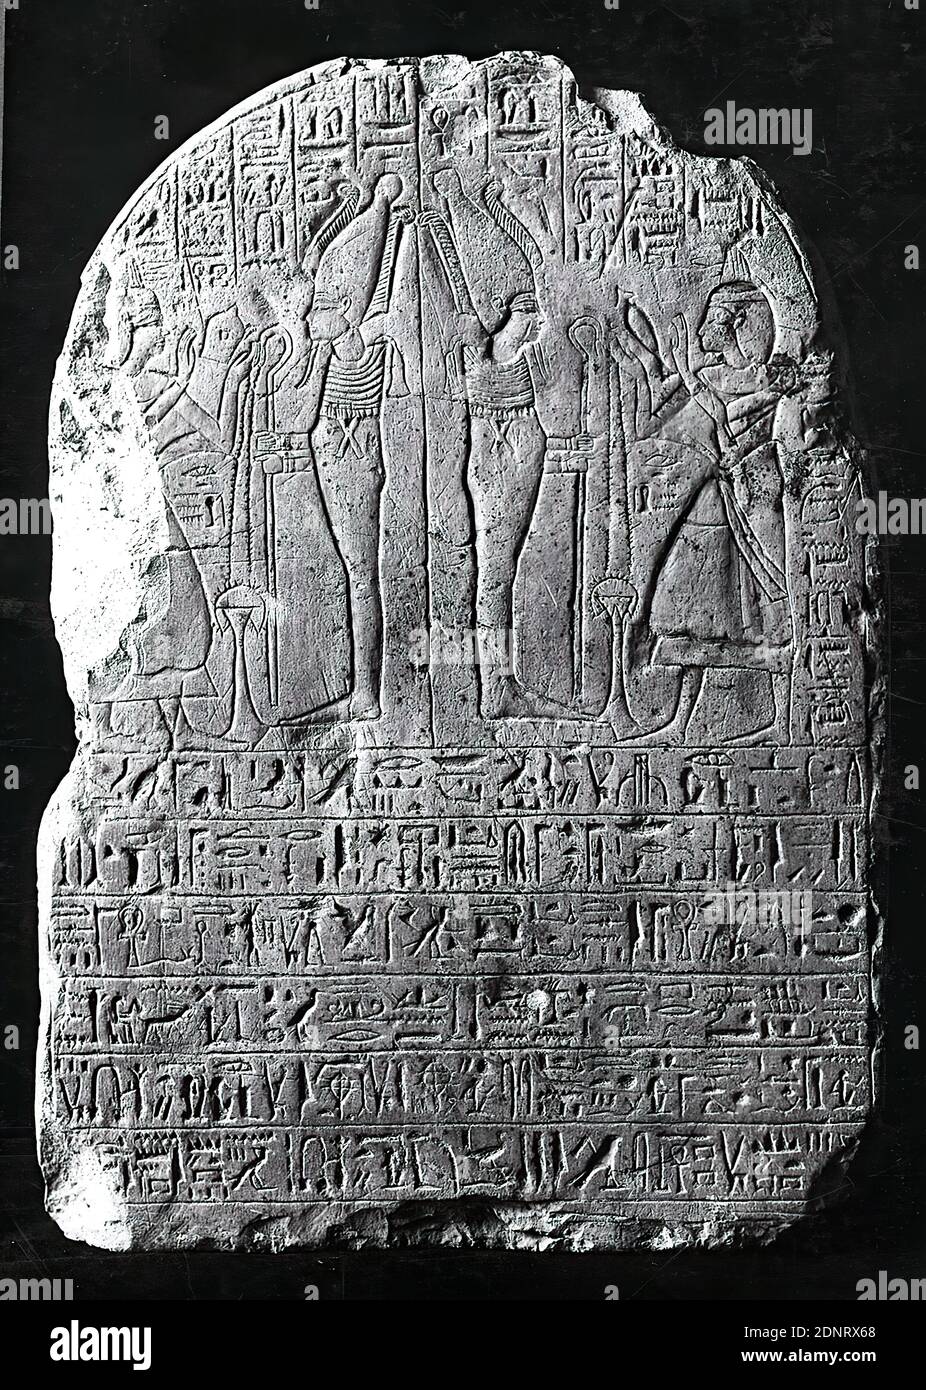 Gravestone of the Hare, Limestone, chiseled, reliefs, Limestone, Total: Height: 34 cm; Width: 25 cm; Depth: 7.5 cm, Grave equipment, funerary monument, tomb, burial place, Osiris, god of the underworld, ritual practices in the Egyptian religion, The small-format gravestone stele has a semicircular upper finish. While the back has been roughly worked off, the finely smoothed front has a relief in the upper section and extensive vertical and horizontal inscriptions. The left side shows an extensive eruption, the right side has bumped edges. Stock Photo